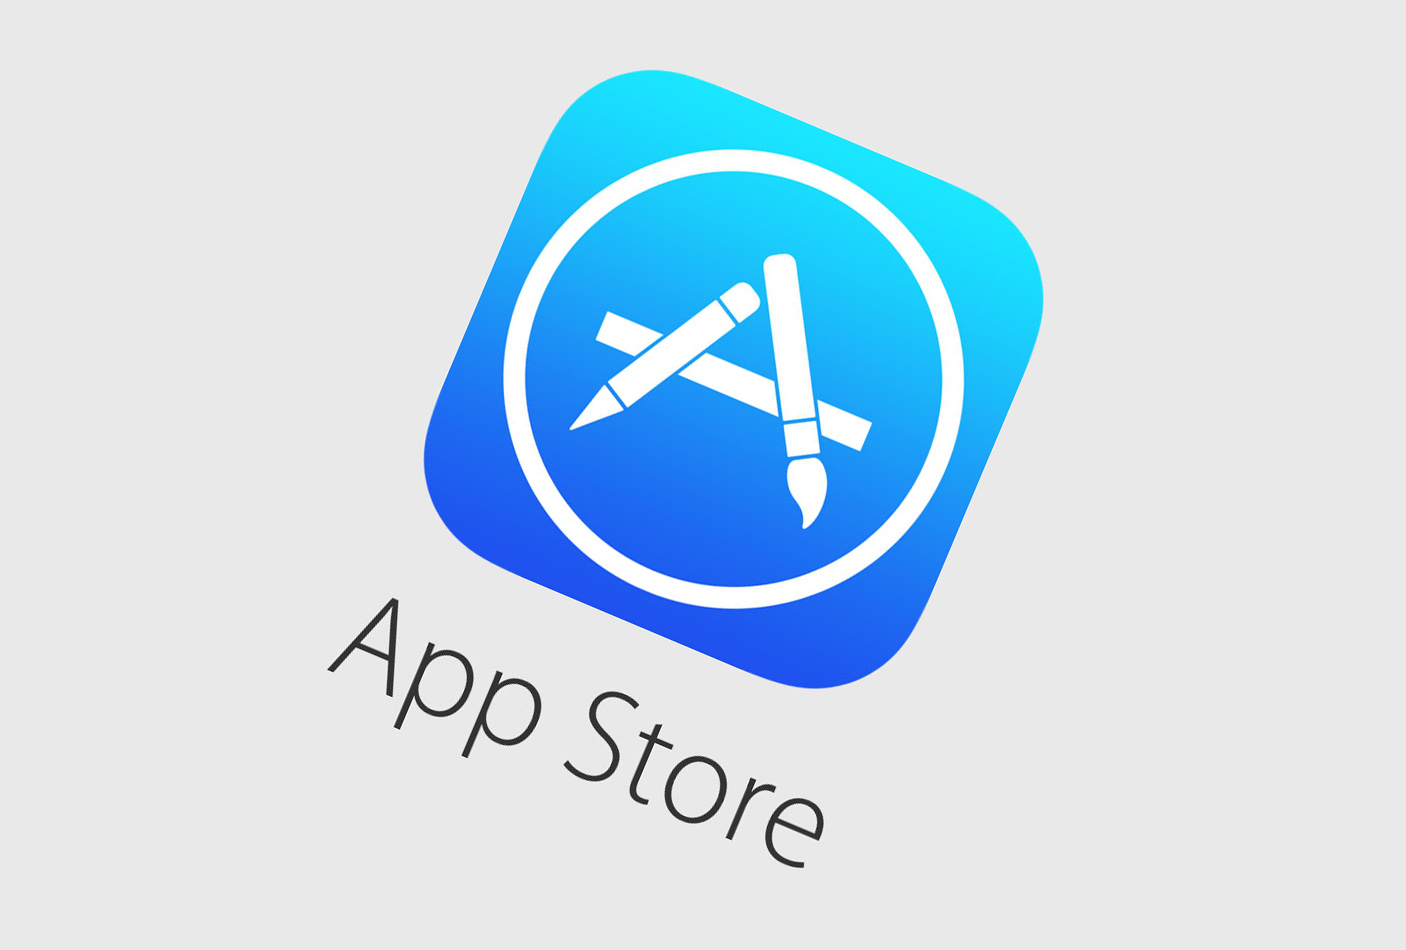 Apple Says Developers Have Earned Over $70 Billion From App Store Since It Launched